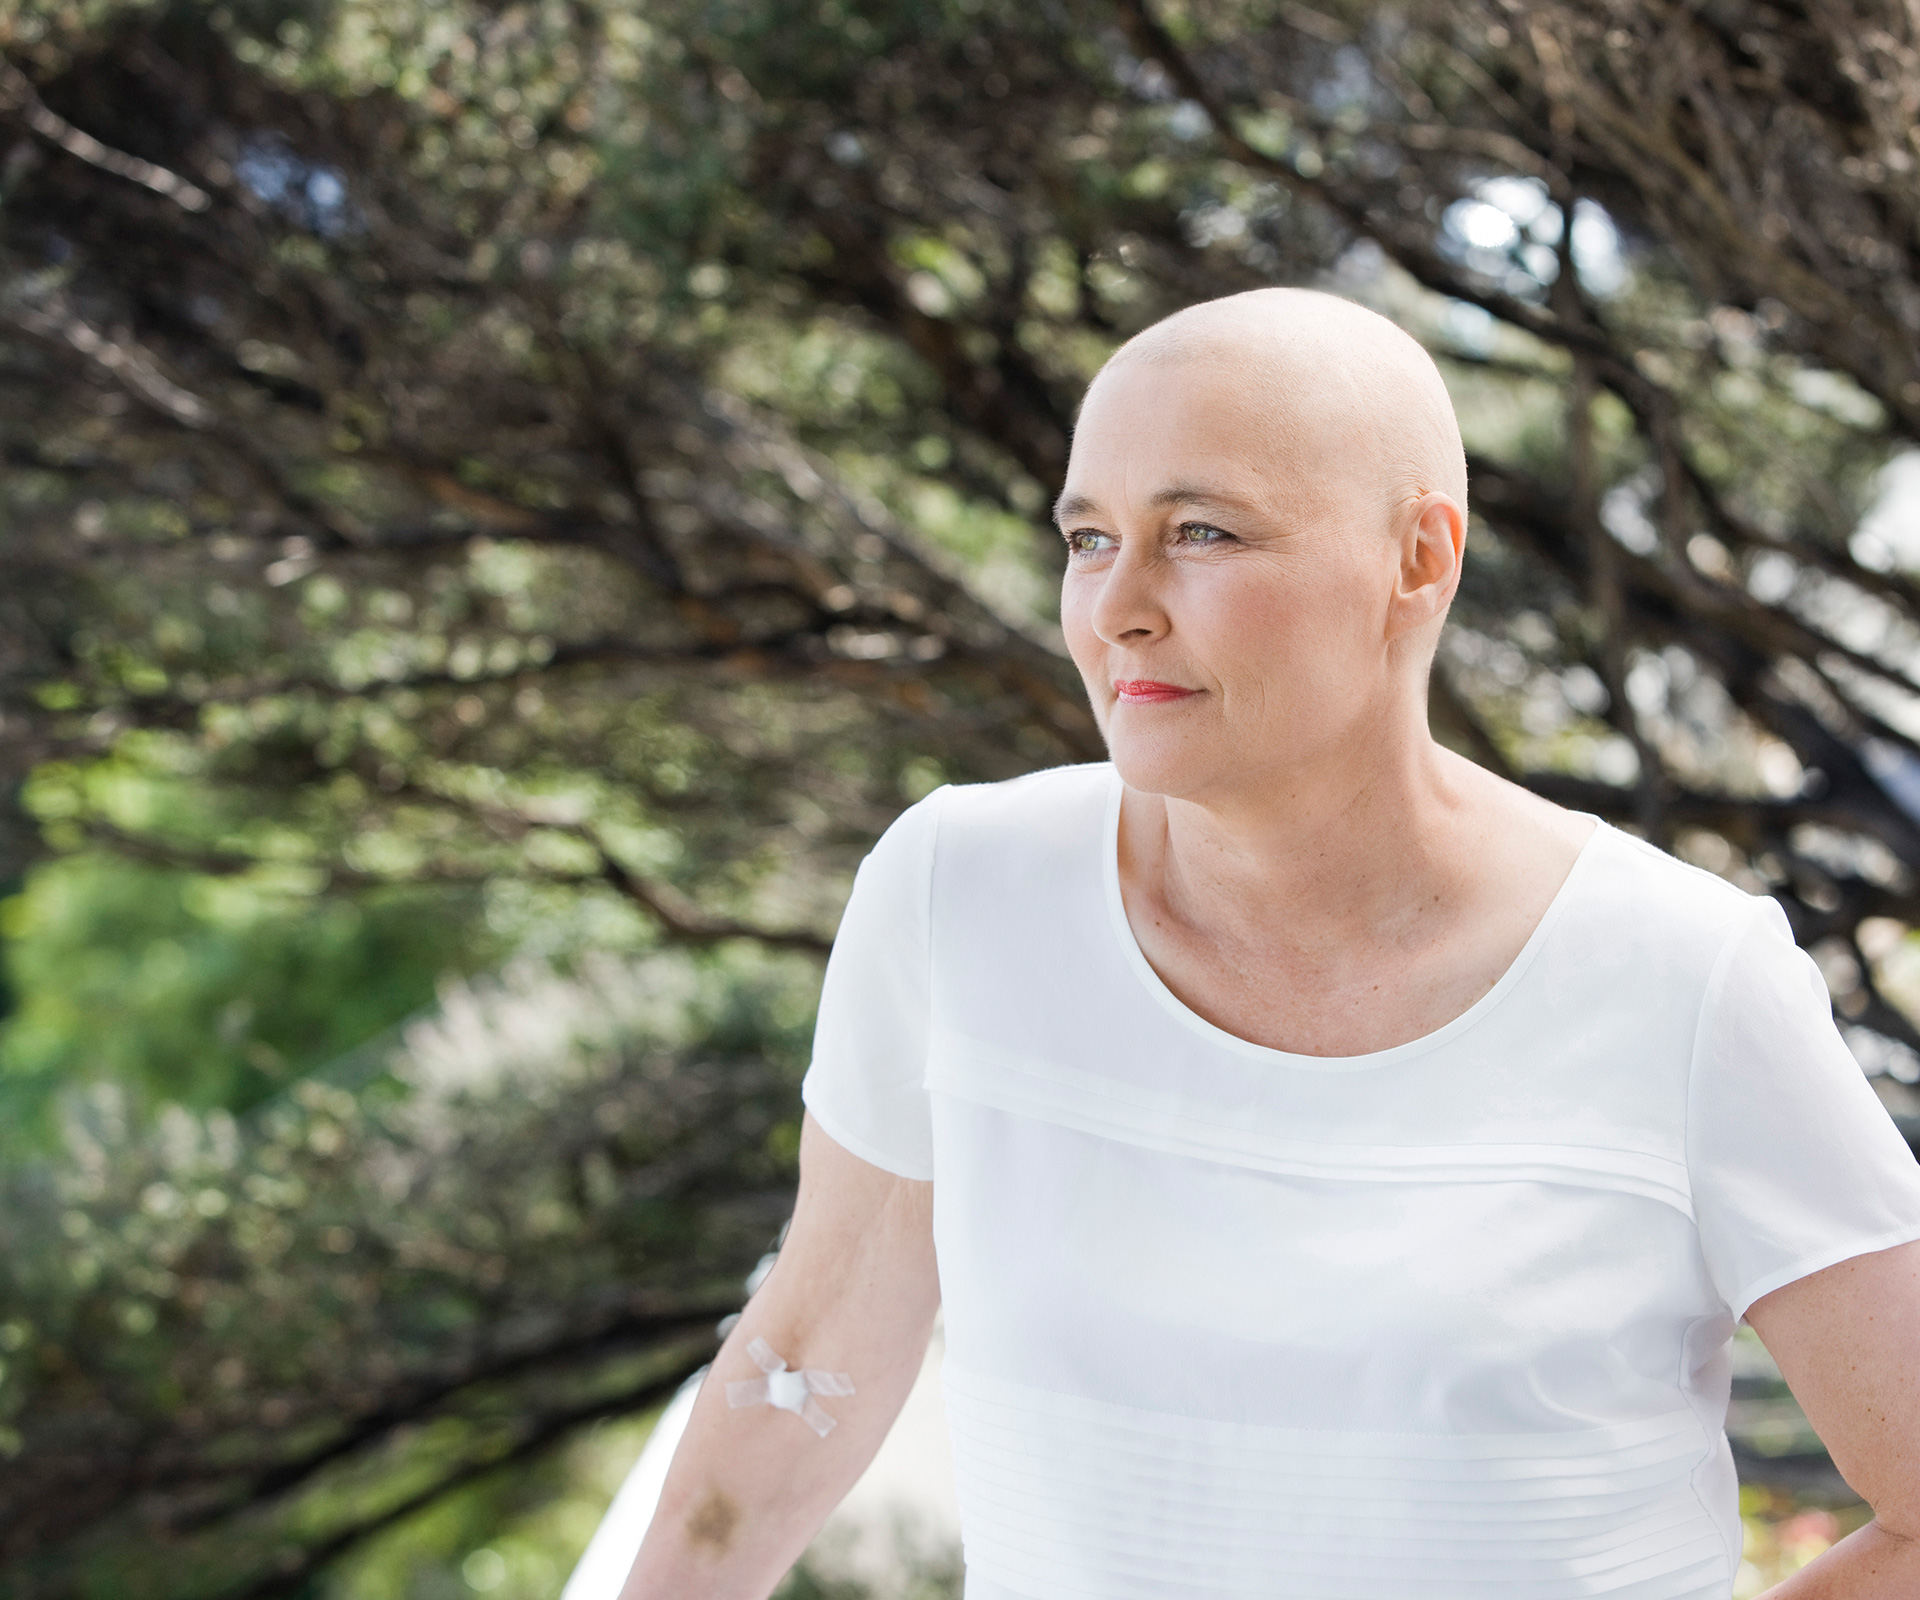 Helen Kelly on life, advocacy and cancer